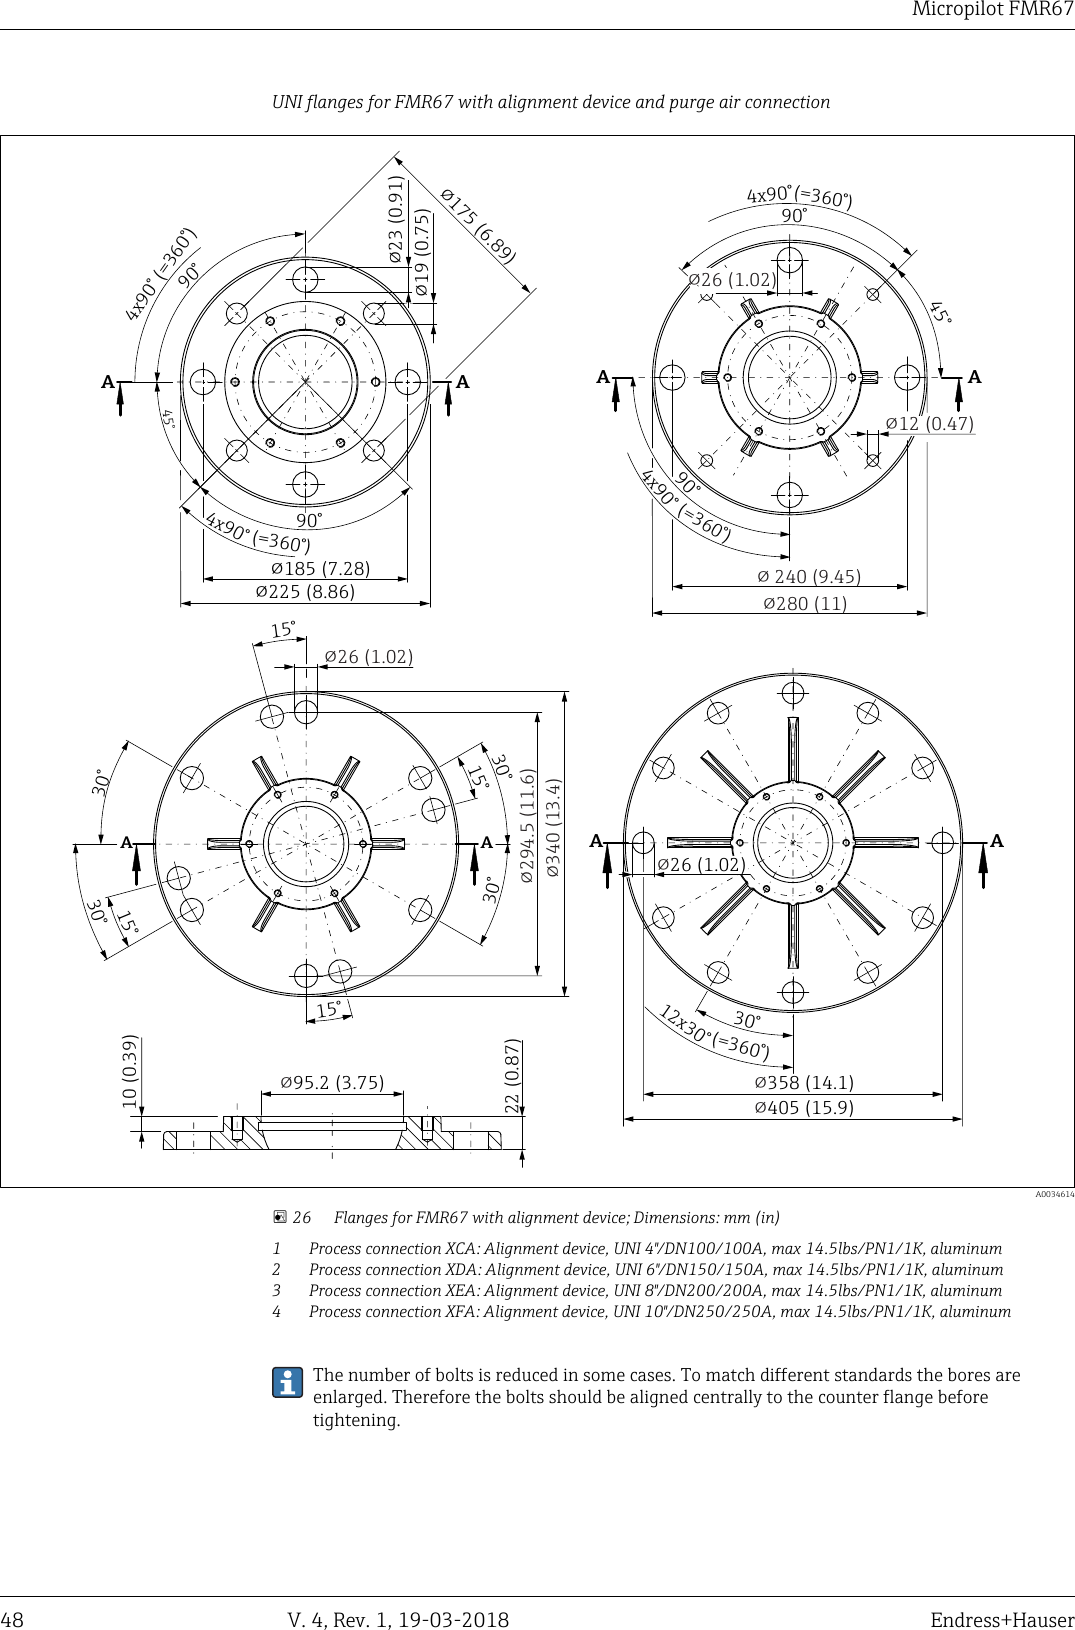 DRAFT DRAFT   DRAFT   DRAFT   DRAFT   DRAFT   DRAFTDRAFT   DRAFT   DRAFTMicropilot FMR6748 V. 4, Rev. 1, 19-03-2018 Endress+HauserUNI flanges for FMR67 with alignment device and purge air connection22 (0.87)!340 (13.4)!294.5 (11.6)AA15°15°30°30°15°30°30°15°!26 (1.02)AA12x30°30°(=360°)!358 (14.1)!405 (15.9)!26 (1.02)10 (0.39)!95.2 (3.75)AA90°!185 (7.28)!225 (8.86)4x90°45°4x90° (=360°)90°!23 (0.91)!19 (0.75)!175 (6.89)(=360°)4x90°90°45°AA90°4x90°! 240 (9.45)!280 (11)(=360°)(=360°)!12 (0.47)!26 (1.02)  A0034614 26 Flanges for FMR67 with alignment device; Dimensions: mm (in)1 Process connection XCA: Alignment device, UNI 4&quot;/DN100/100A, max 14.5lbs/PN1/1K, aluminum2 Process connection XDA: Alignment device, UNI 6&quot;/DN150/150A, max 14.5lbs/PN1/1K, aluminum3 Process connection XEA: Alignment device, UNI 8&quot;/DN200/200A, max 14.5lbs/PN1/1K, aluminum4 Process connection XFA: Alignment device, UNI 10&quot;/DN250/250A, max 14.5lbs/PN1/1K, aluminumThe number of bolts is reduced in some cases. To match different standards the bores areenlarged. Therefore the bolts should be aligned centrally to the counter flange beforetightening.